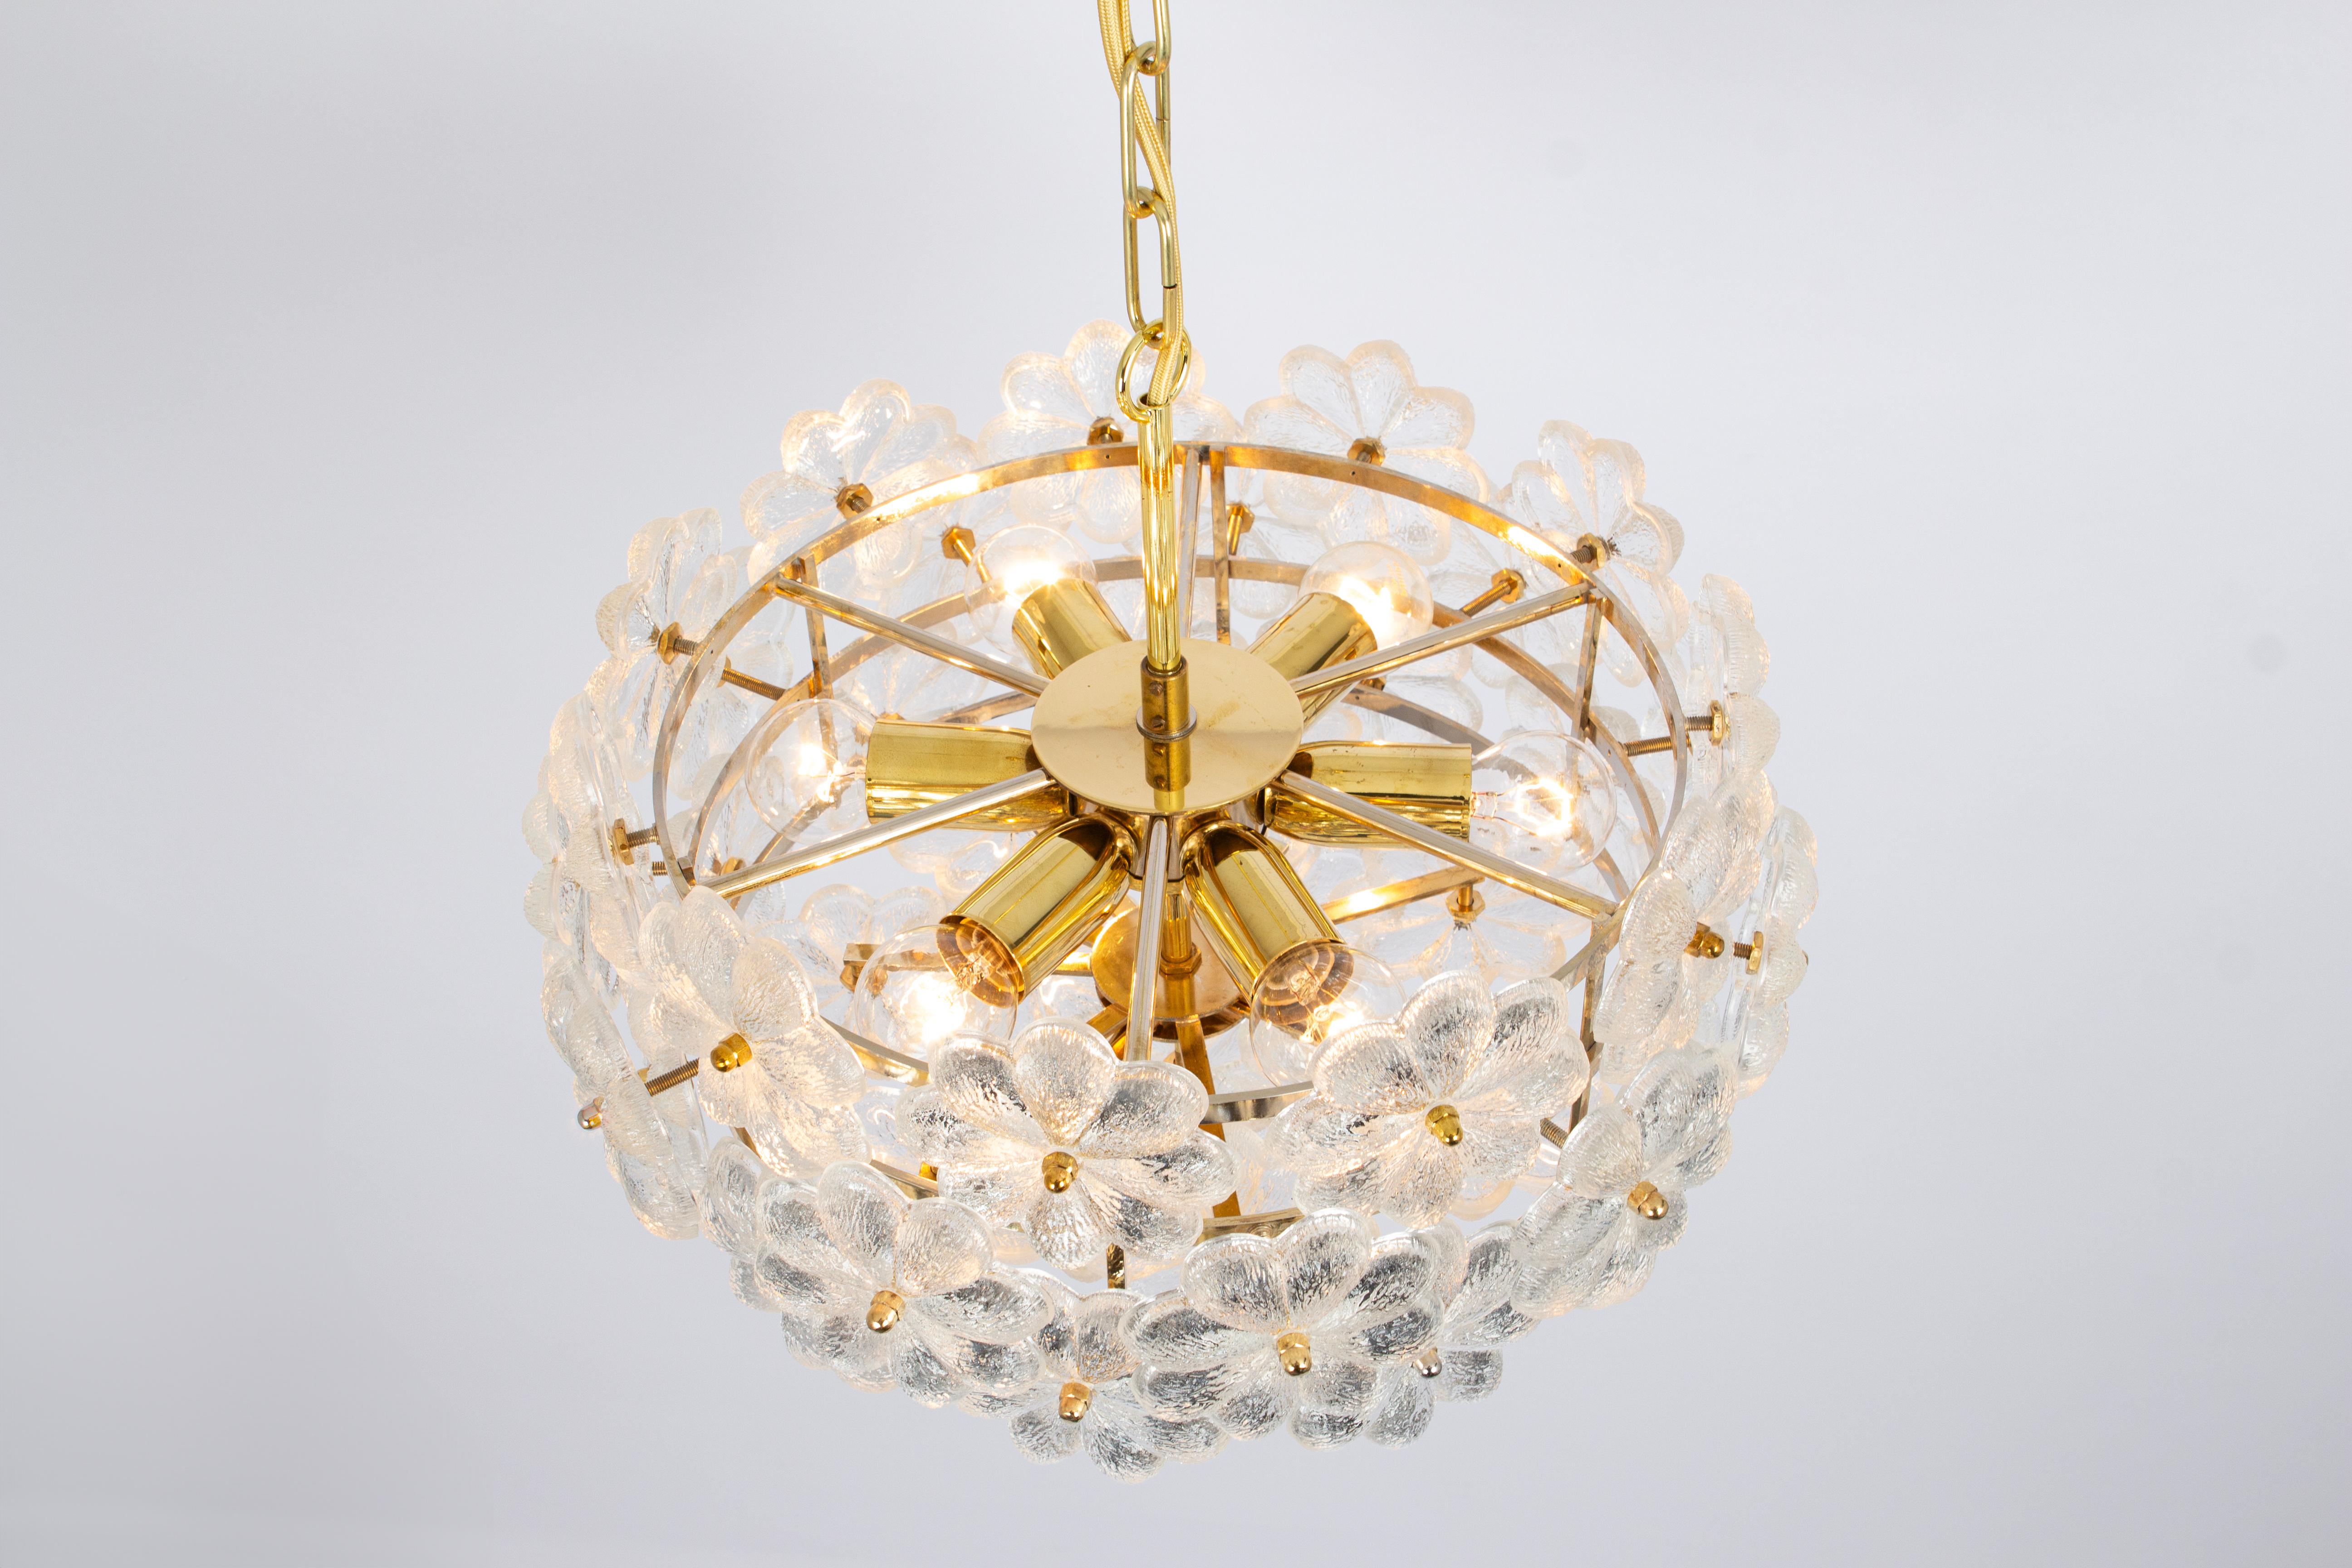 Brass 1 of 2 Stunning Petite Murano Glass Chandelier by Ernst Palme, Germany, 1970s For Sale